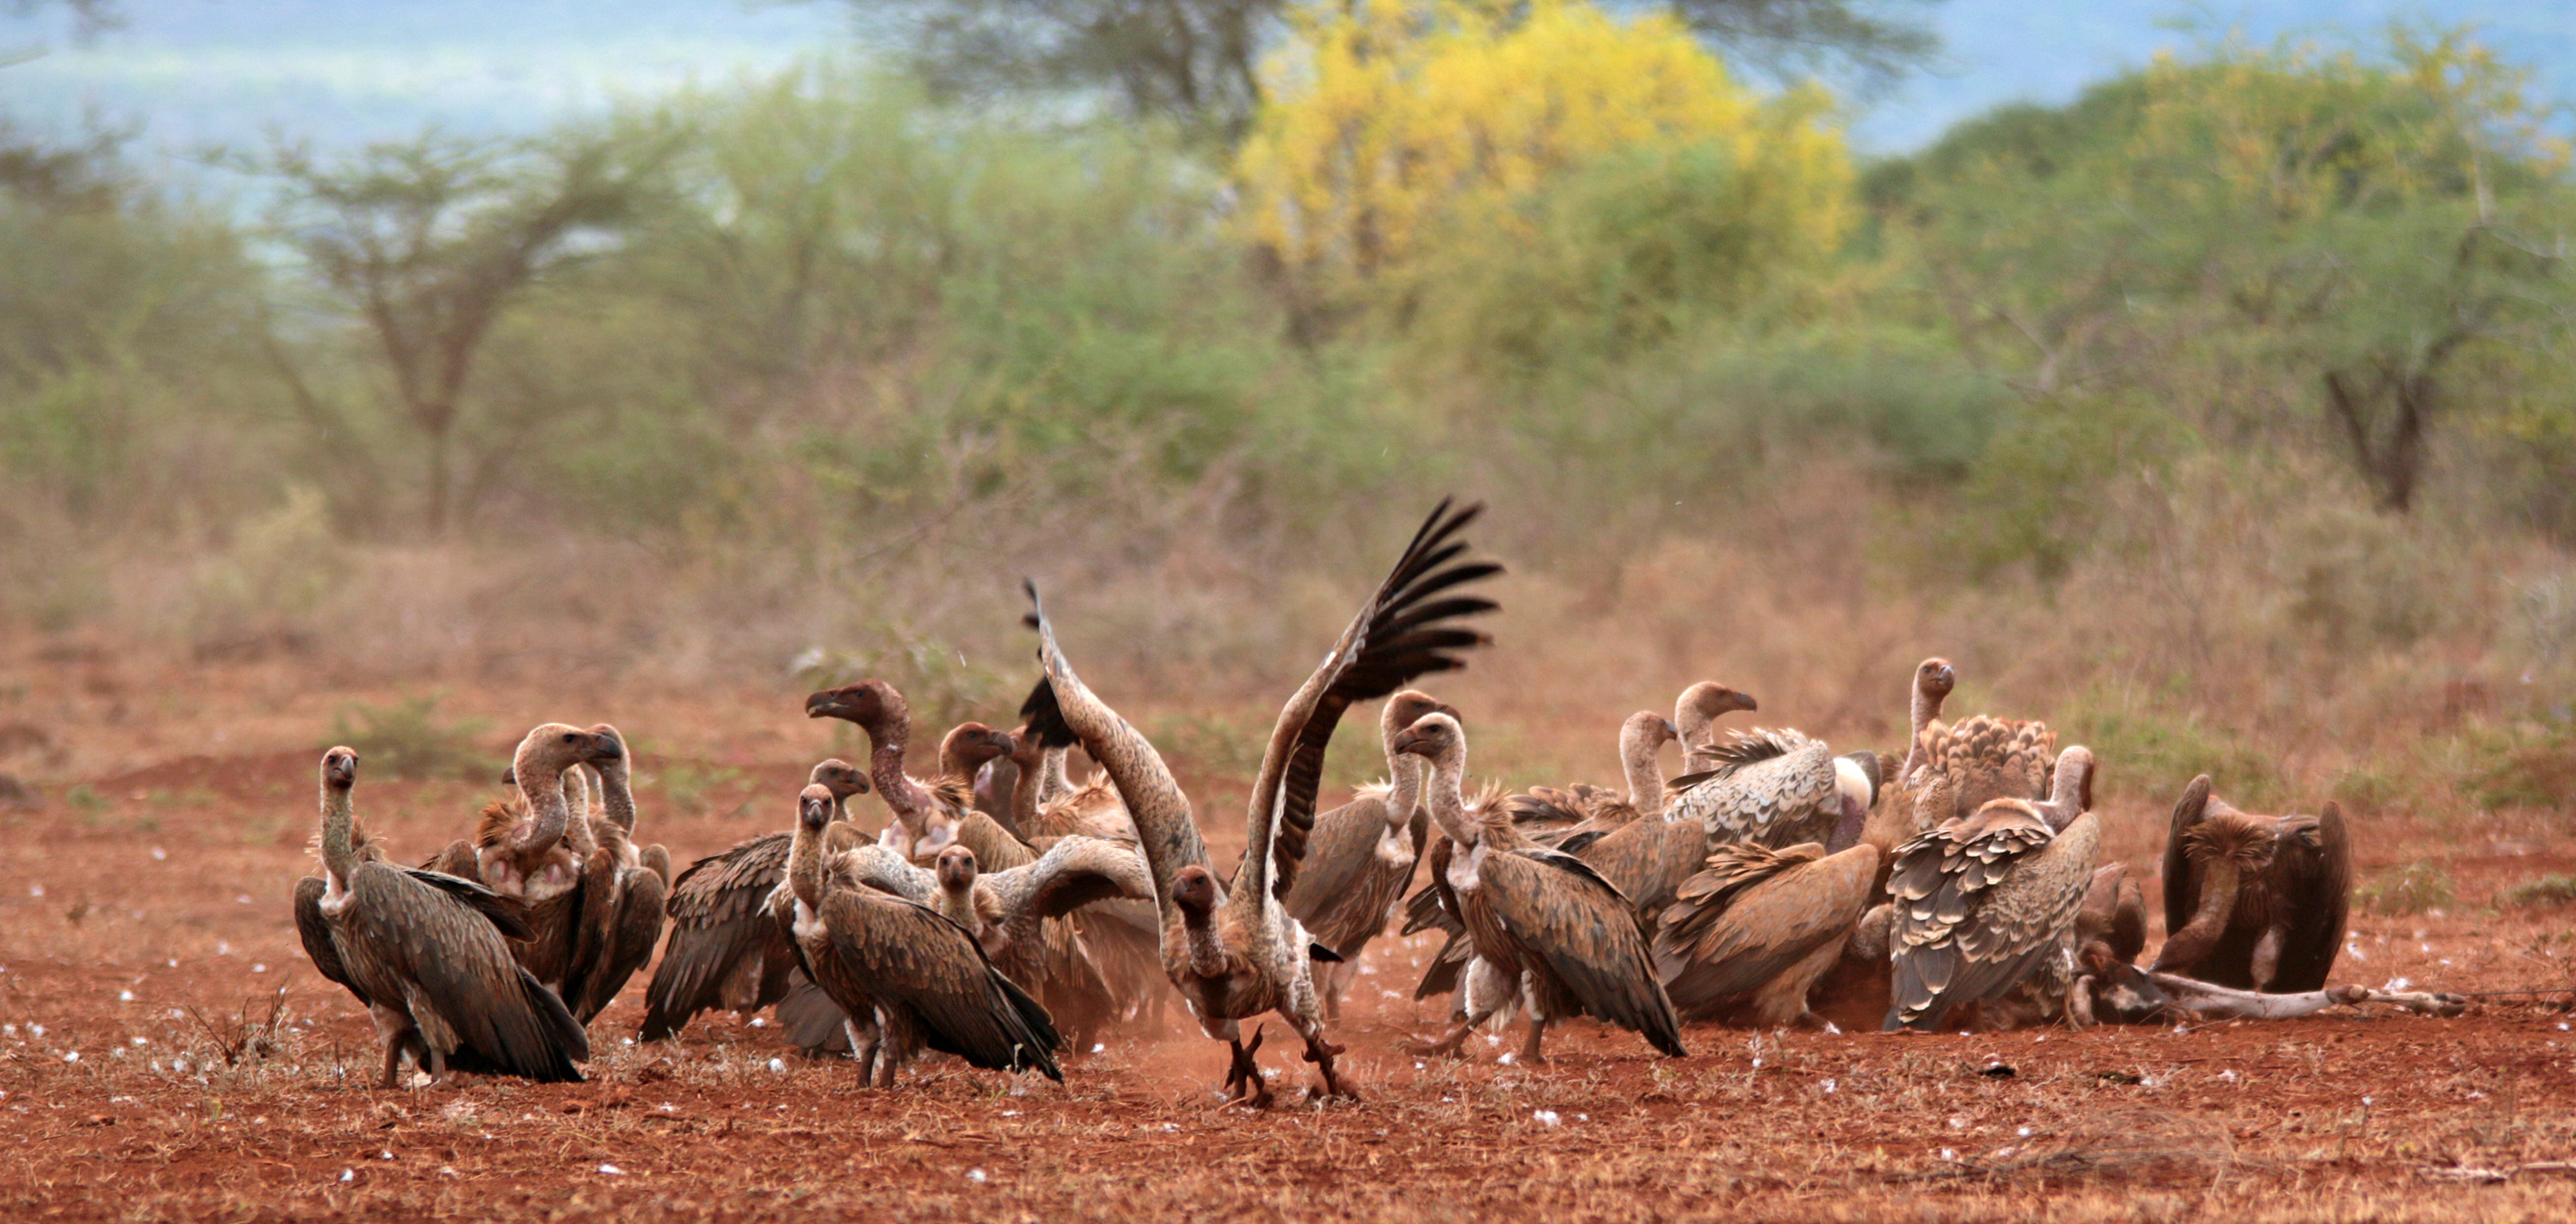 Into a Vulture Lover's Paradise – National Geographic Blog